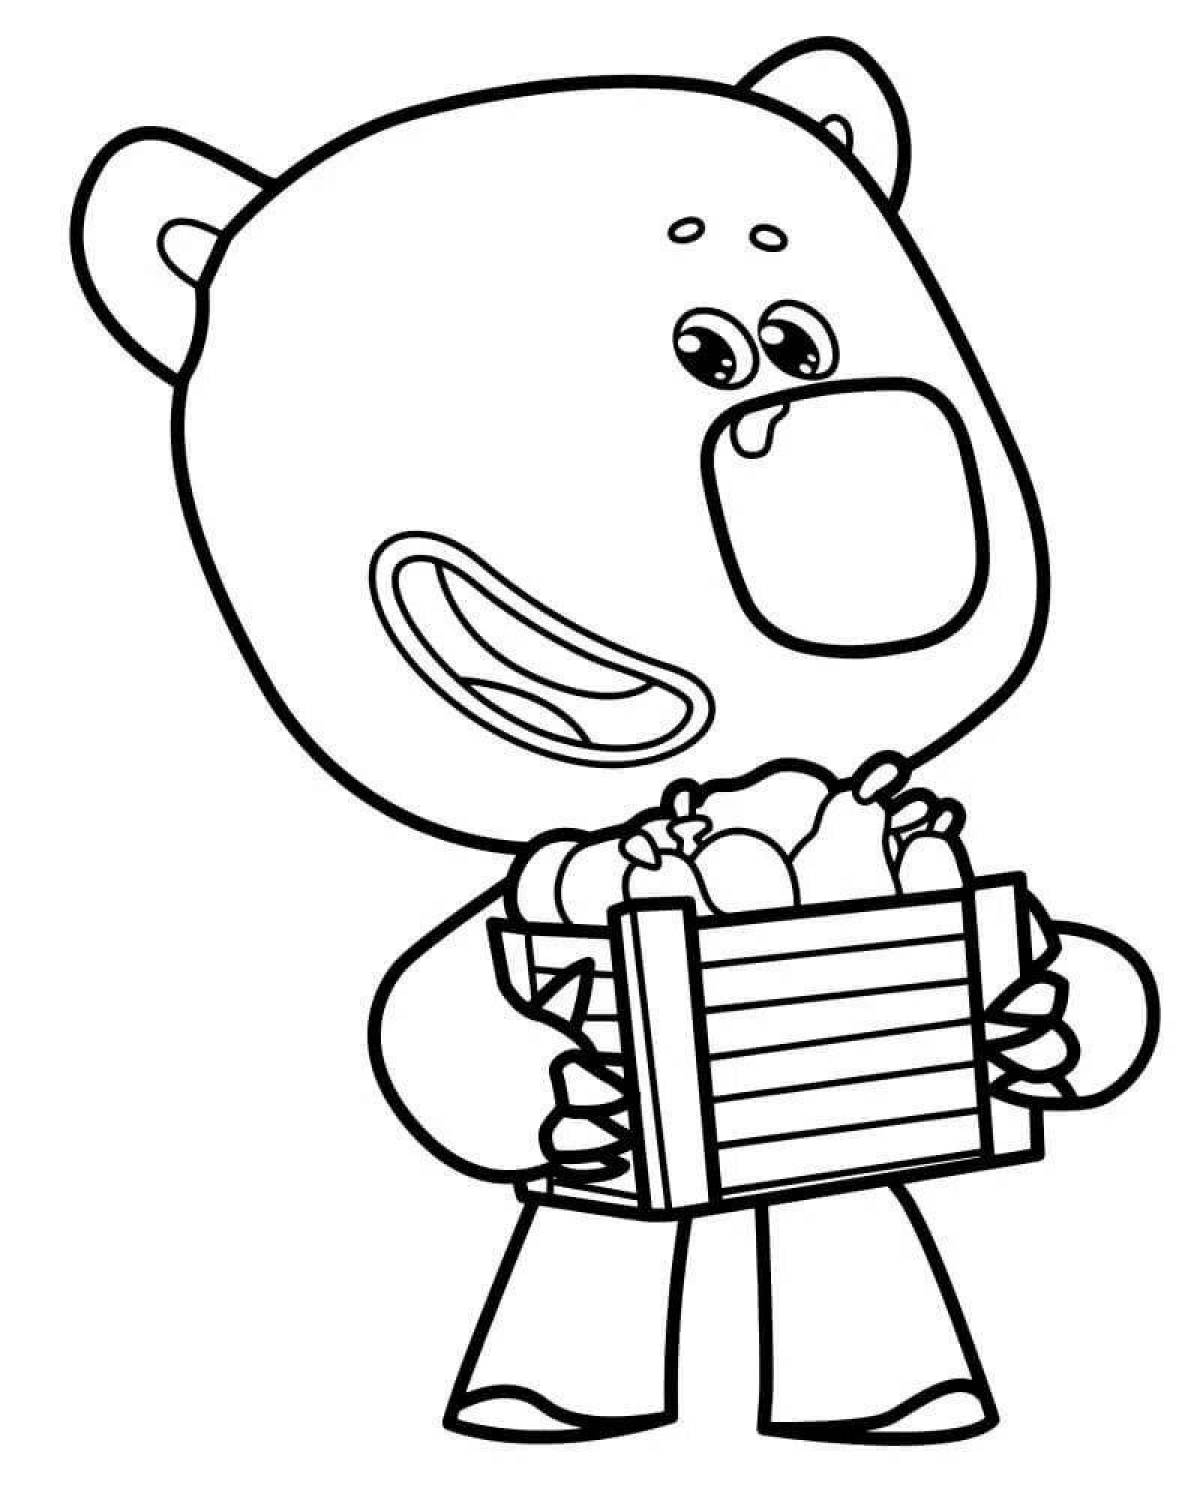 Crazy coloring pages imitating pages